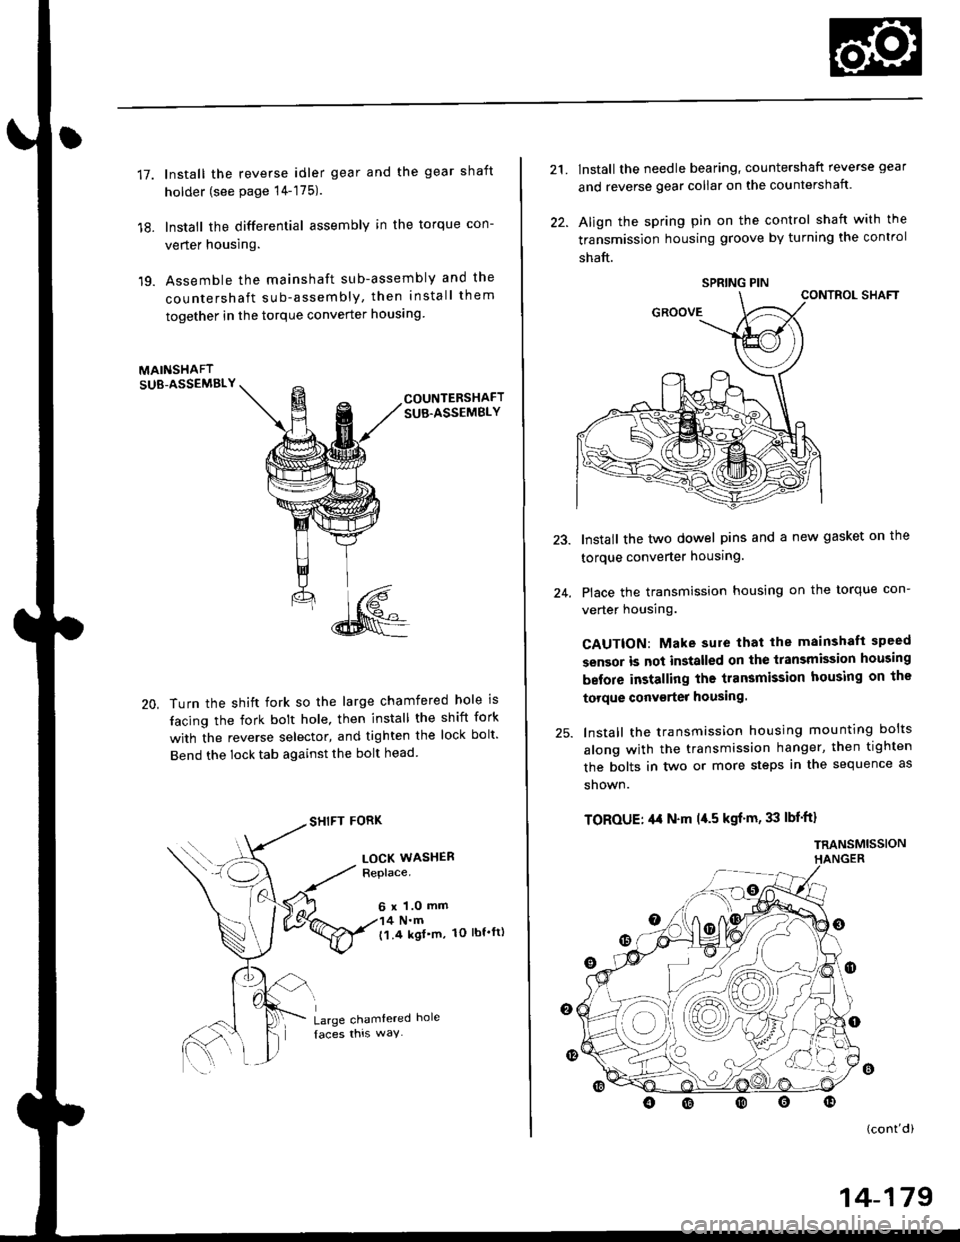 HONDA CIVIC 1996 6.G Workshop Manual 17.
18.
19.
lnstall the reverse idler gear and the gear shaft
holder (see page 14-175).
lnstall the differential assembly in the torque con-
verter housing.
Assemble the mainshaft sub-assembly and the